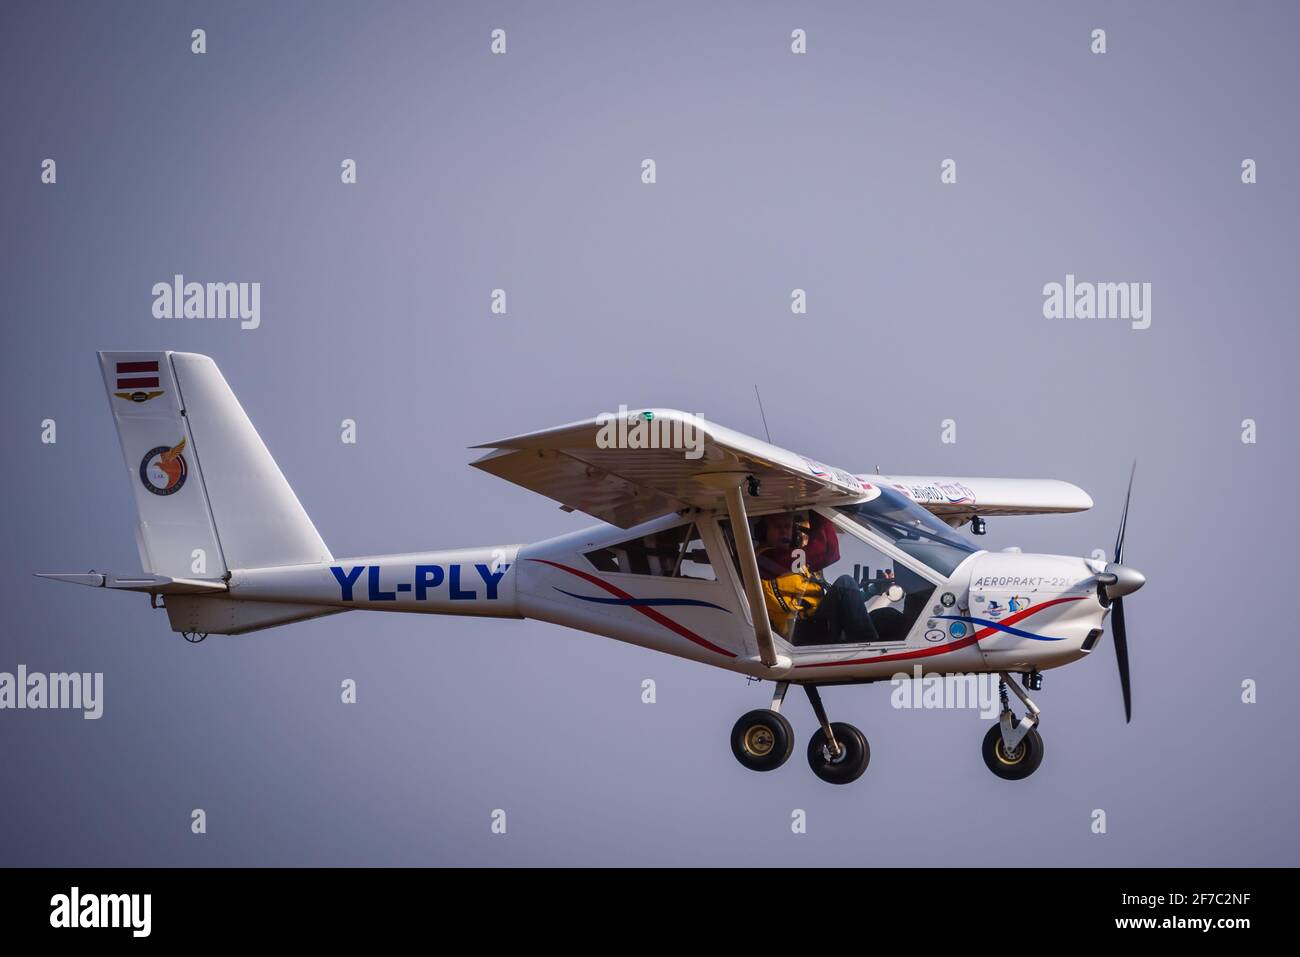 A DAZI, LATVIA. 27th March 2021. Aeropakt A22 L2 Foxbat YL PLY airplane flying in the sky. Stock Photo